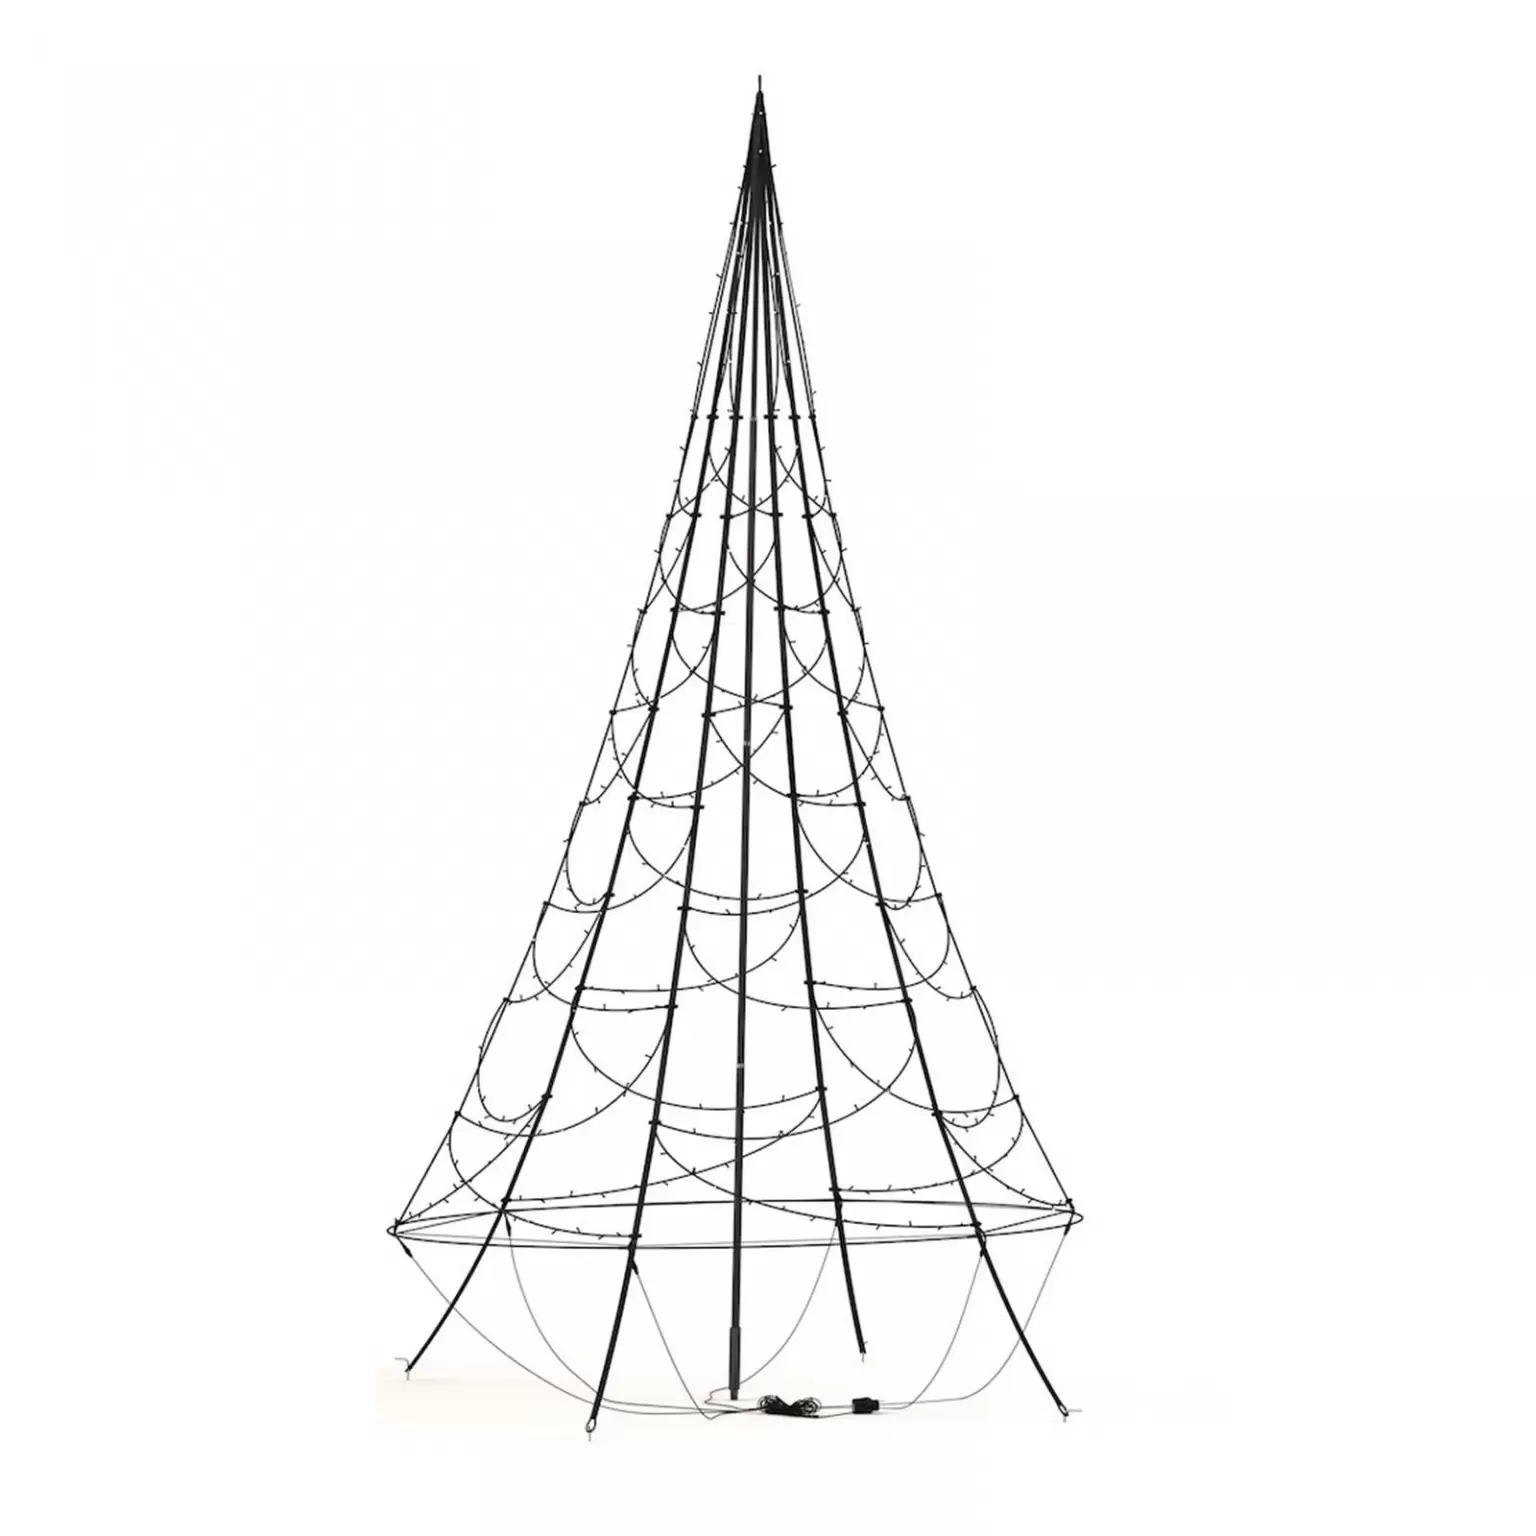 LED Kerstboom | 400cm LED - Tuincollectie.nl